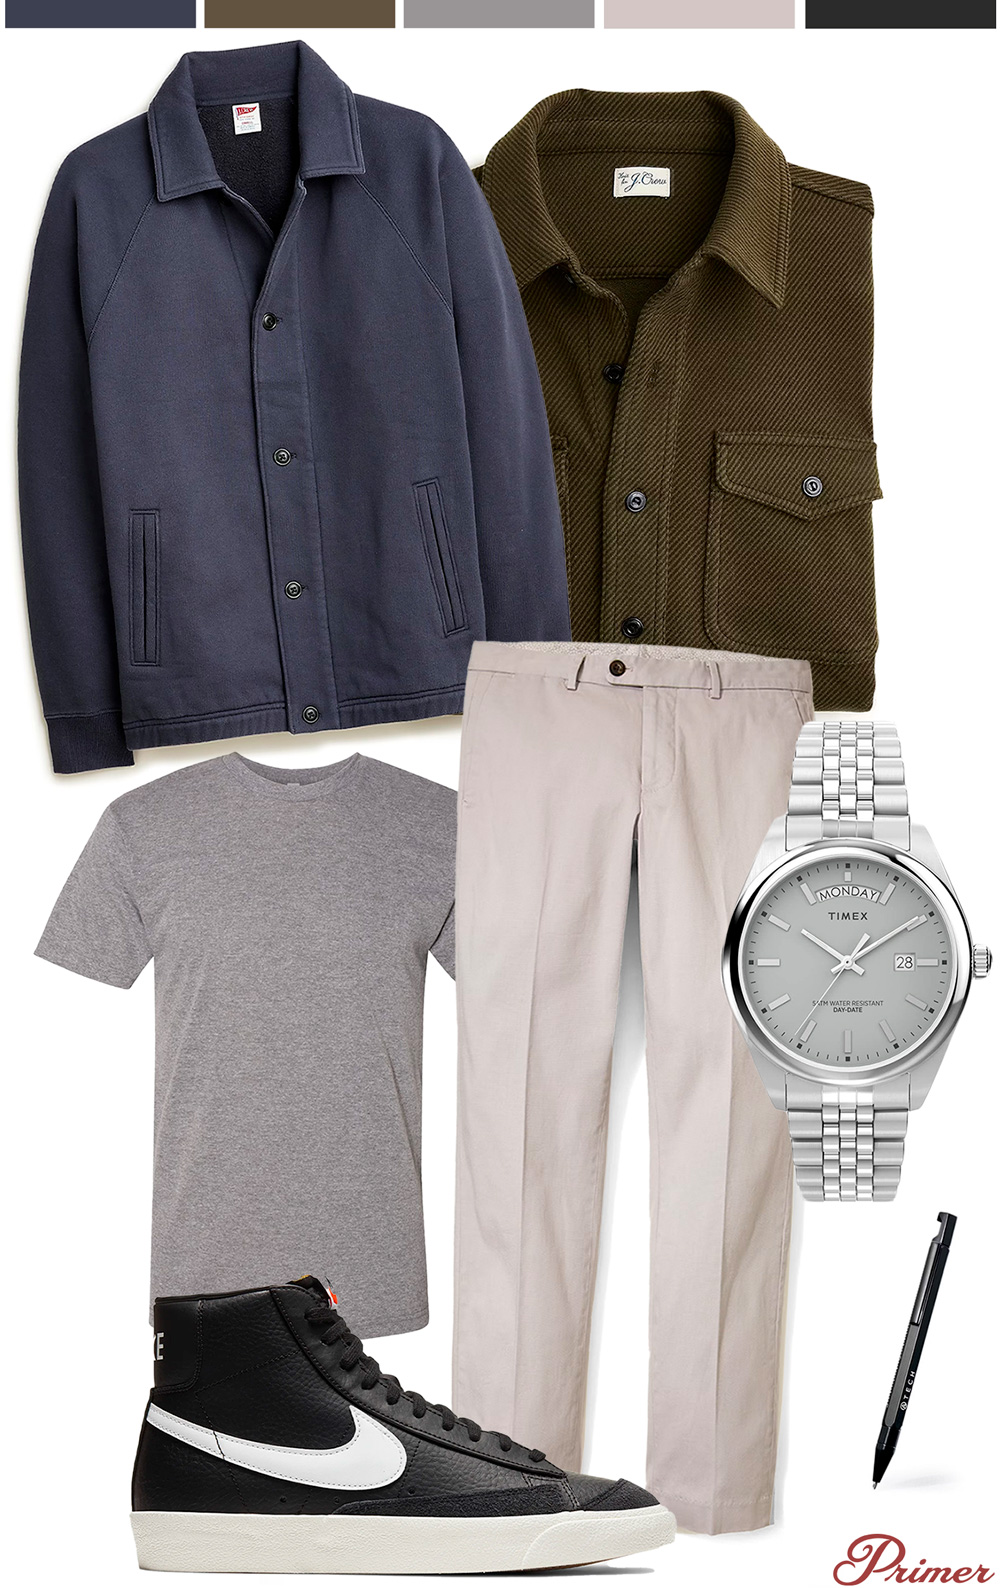 A collage of men's outfit items, including a navy blue jacket, a dark olive green shirt with two chest pockets, a pair of light beige chinos, and a grey crew neck t-shirt, and a pair of black high-top sneakers. A silver wristwatch with a white face displaying the day and date, and a black pen. Above the items, there are color swatches coordinating with the clothes and accessories. The logo "Primer" is at the bottom right corner.